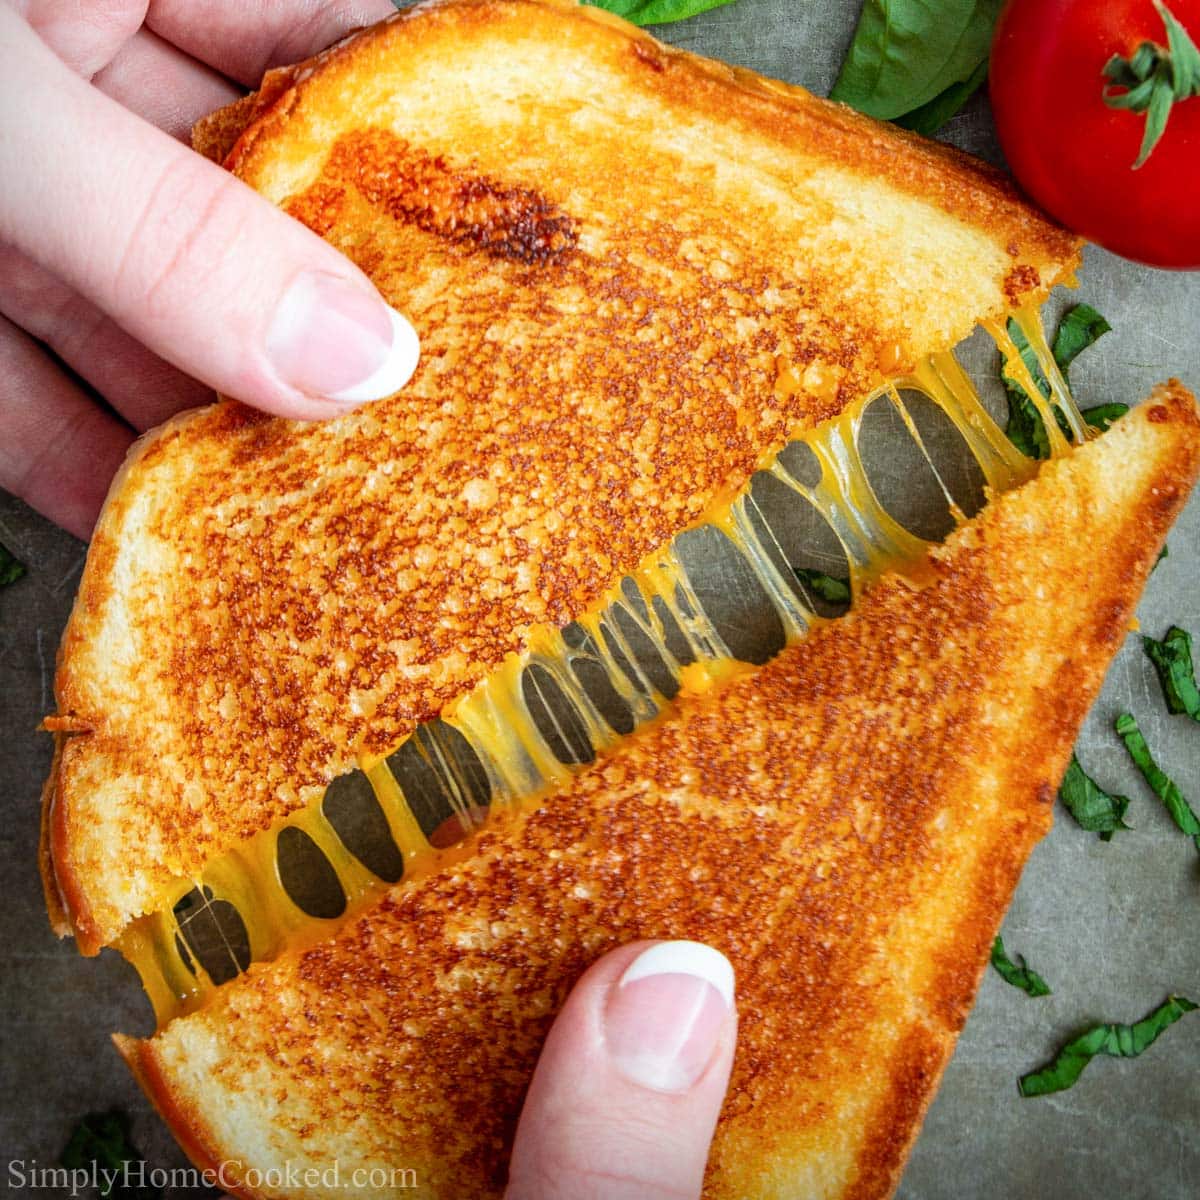 https://simplyhomecooked.com/wp-content/uploads/2021/06/grilled-cheese-sandwich-3.jpg